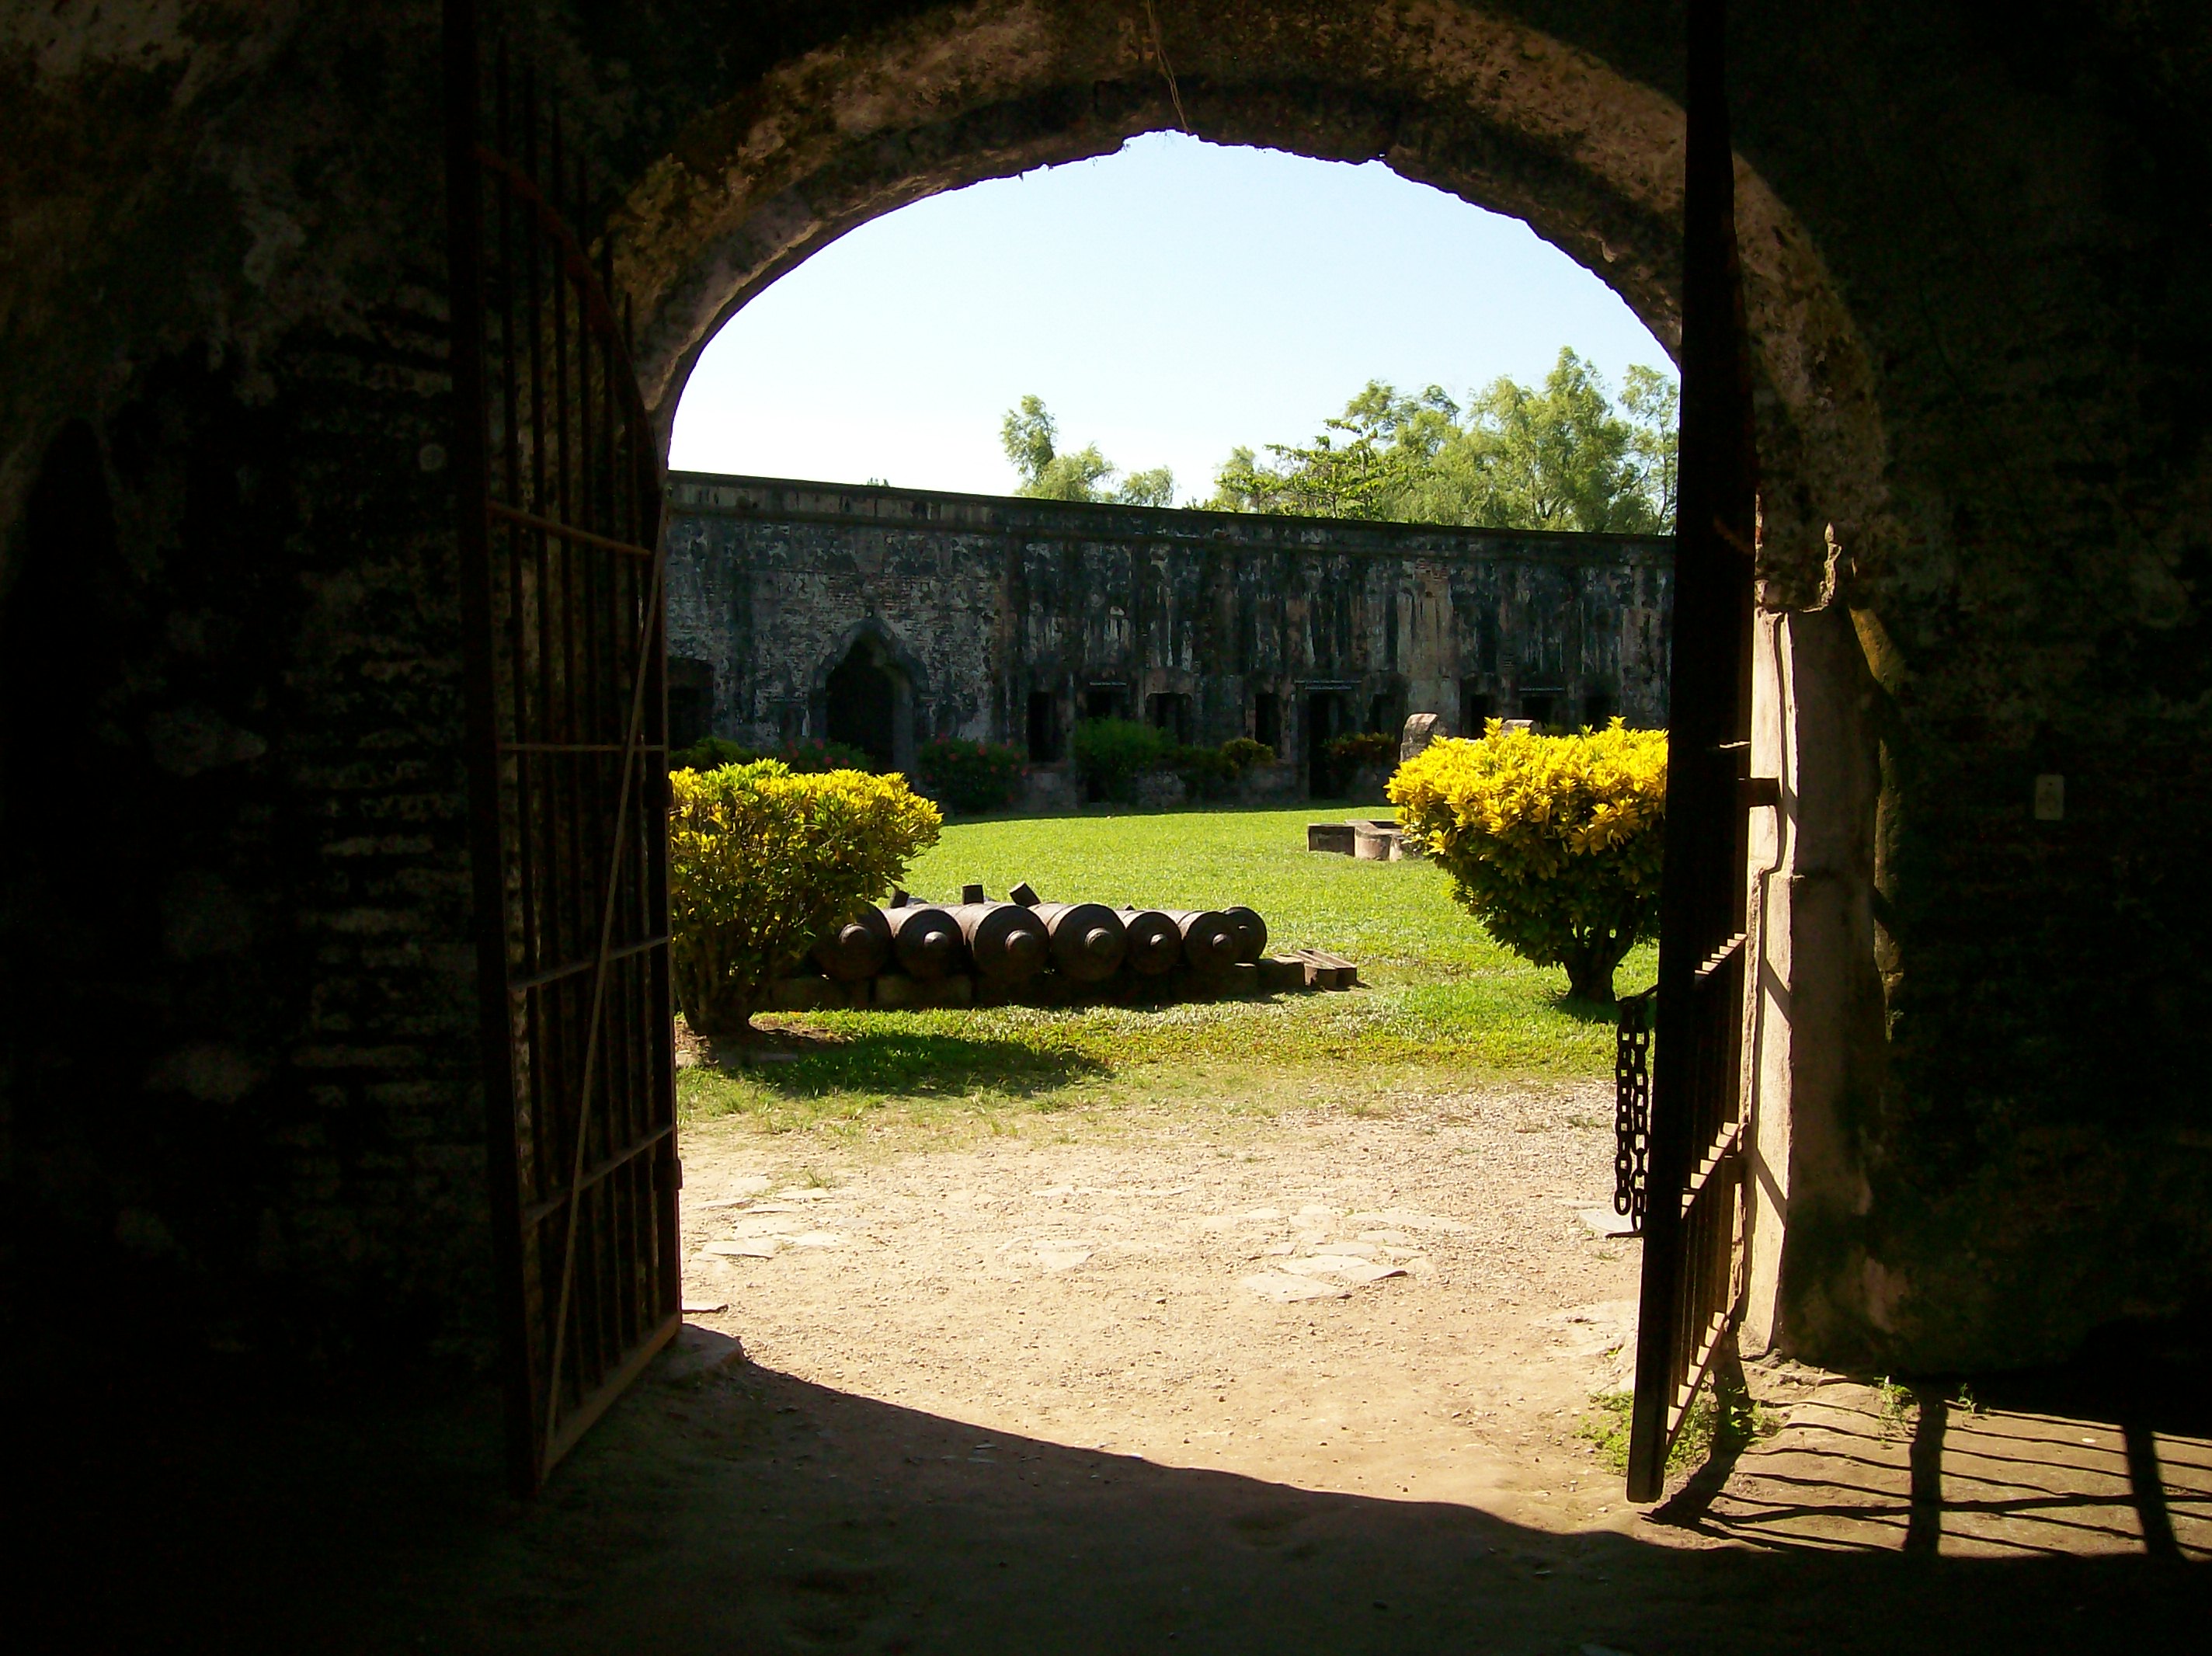 San Fernando de Omoa Fortress. Access to the parade ground of the fortress. Photo: Gerardo Johnson-Museum of Omoa Fortress